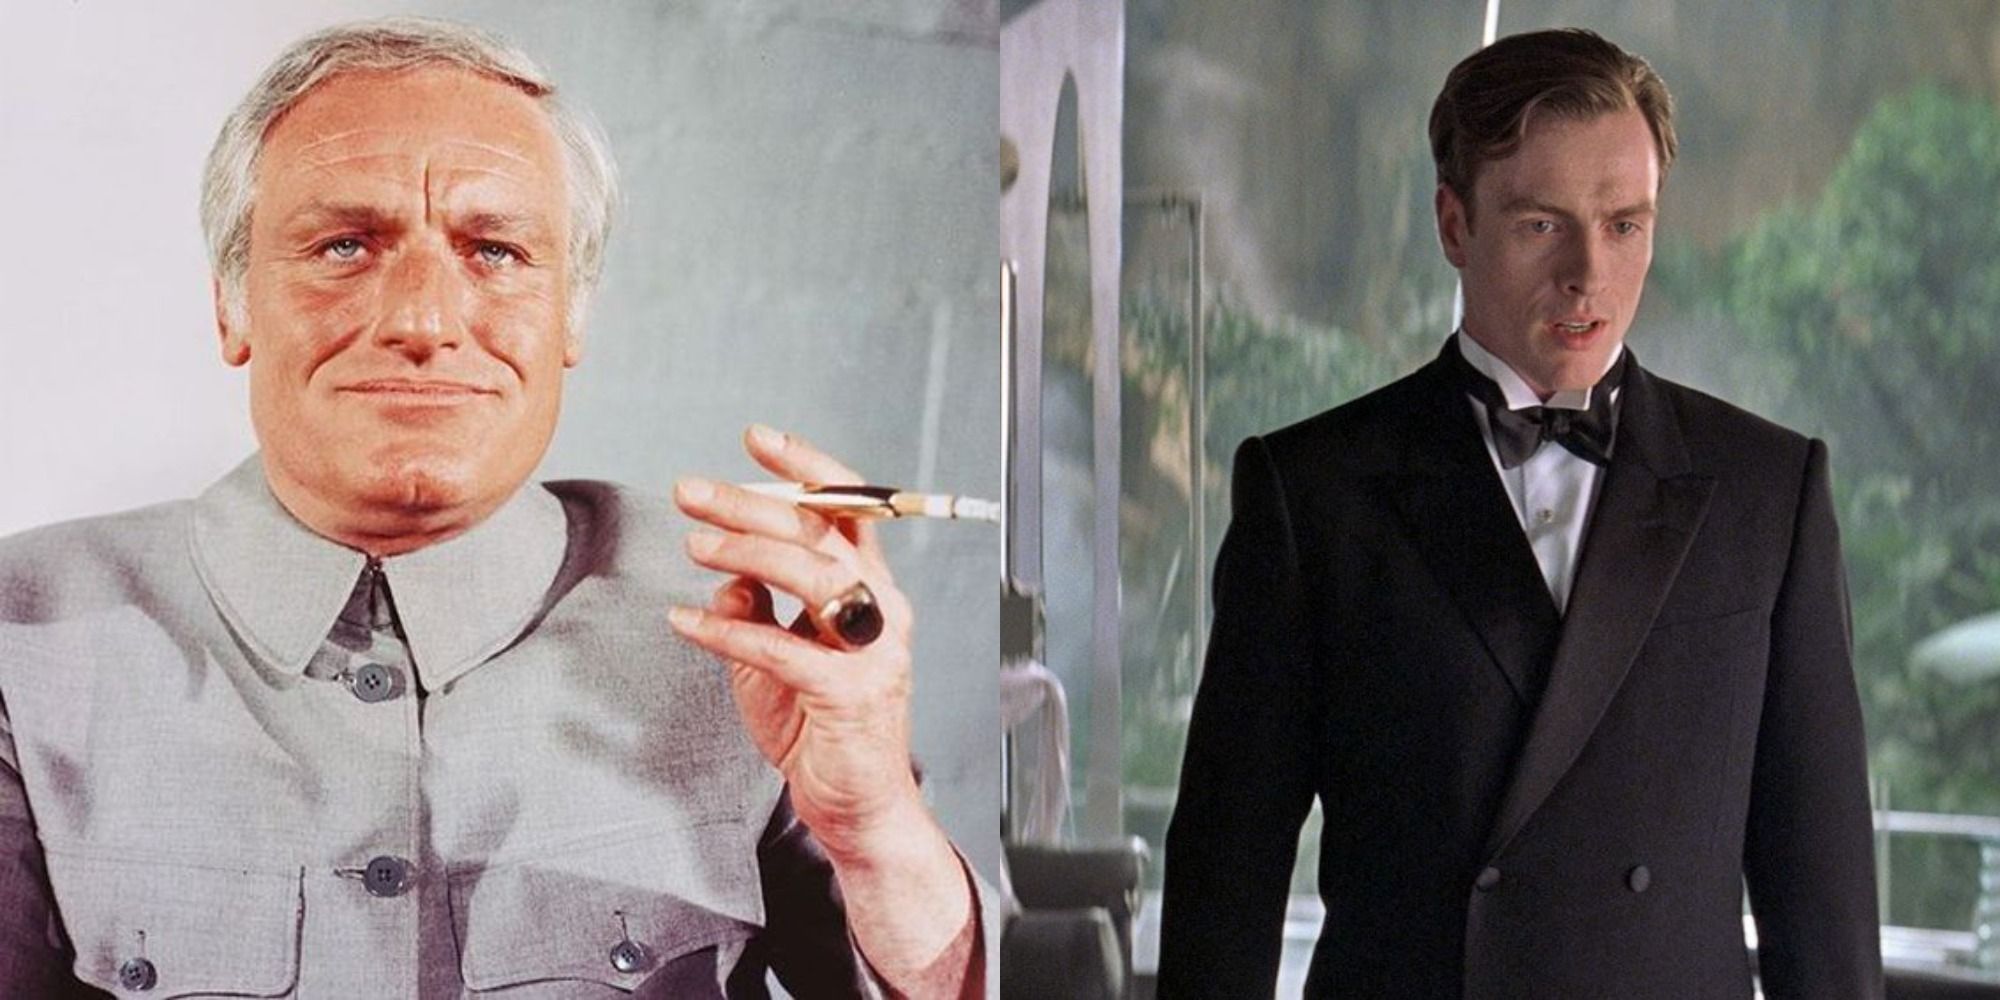 Split image showing Ernst Stavro Blofeld in Diamonds are Forever and Gustav Graves in Die Another Day